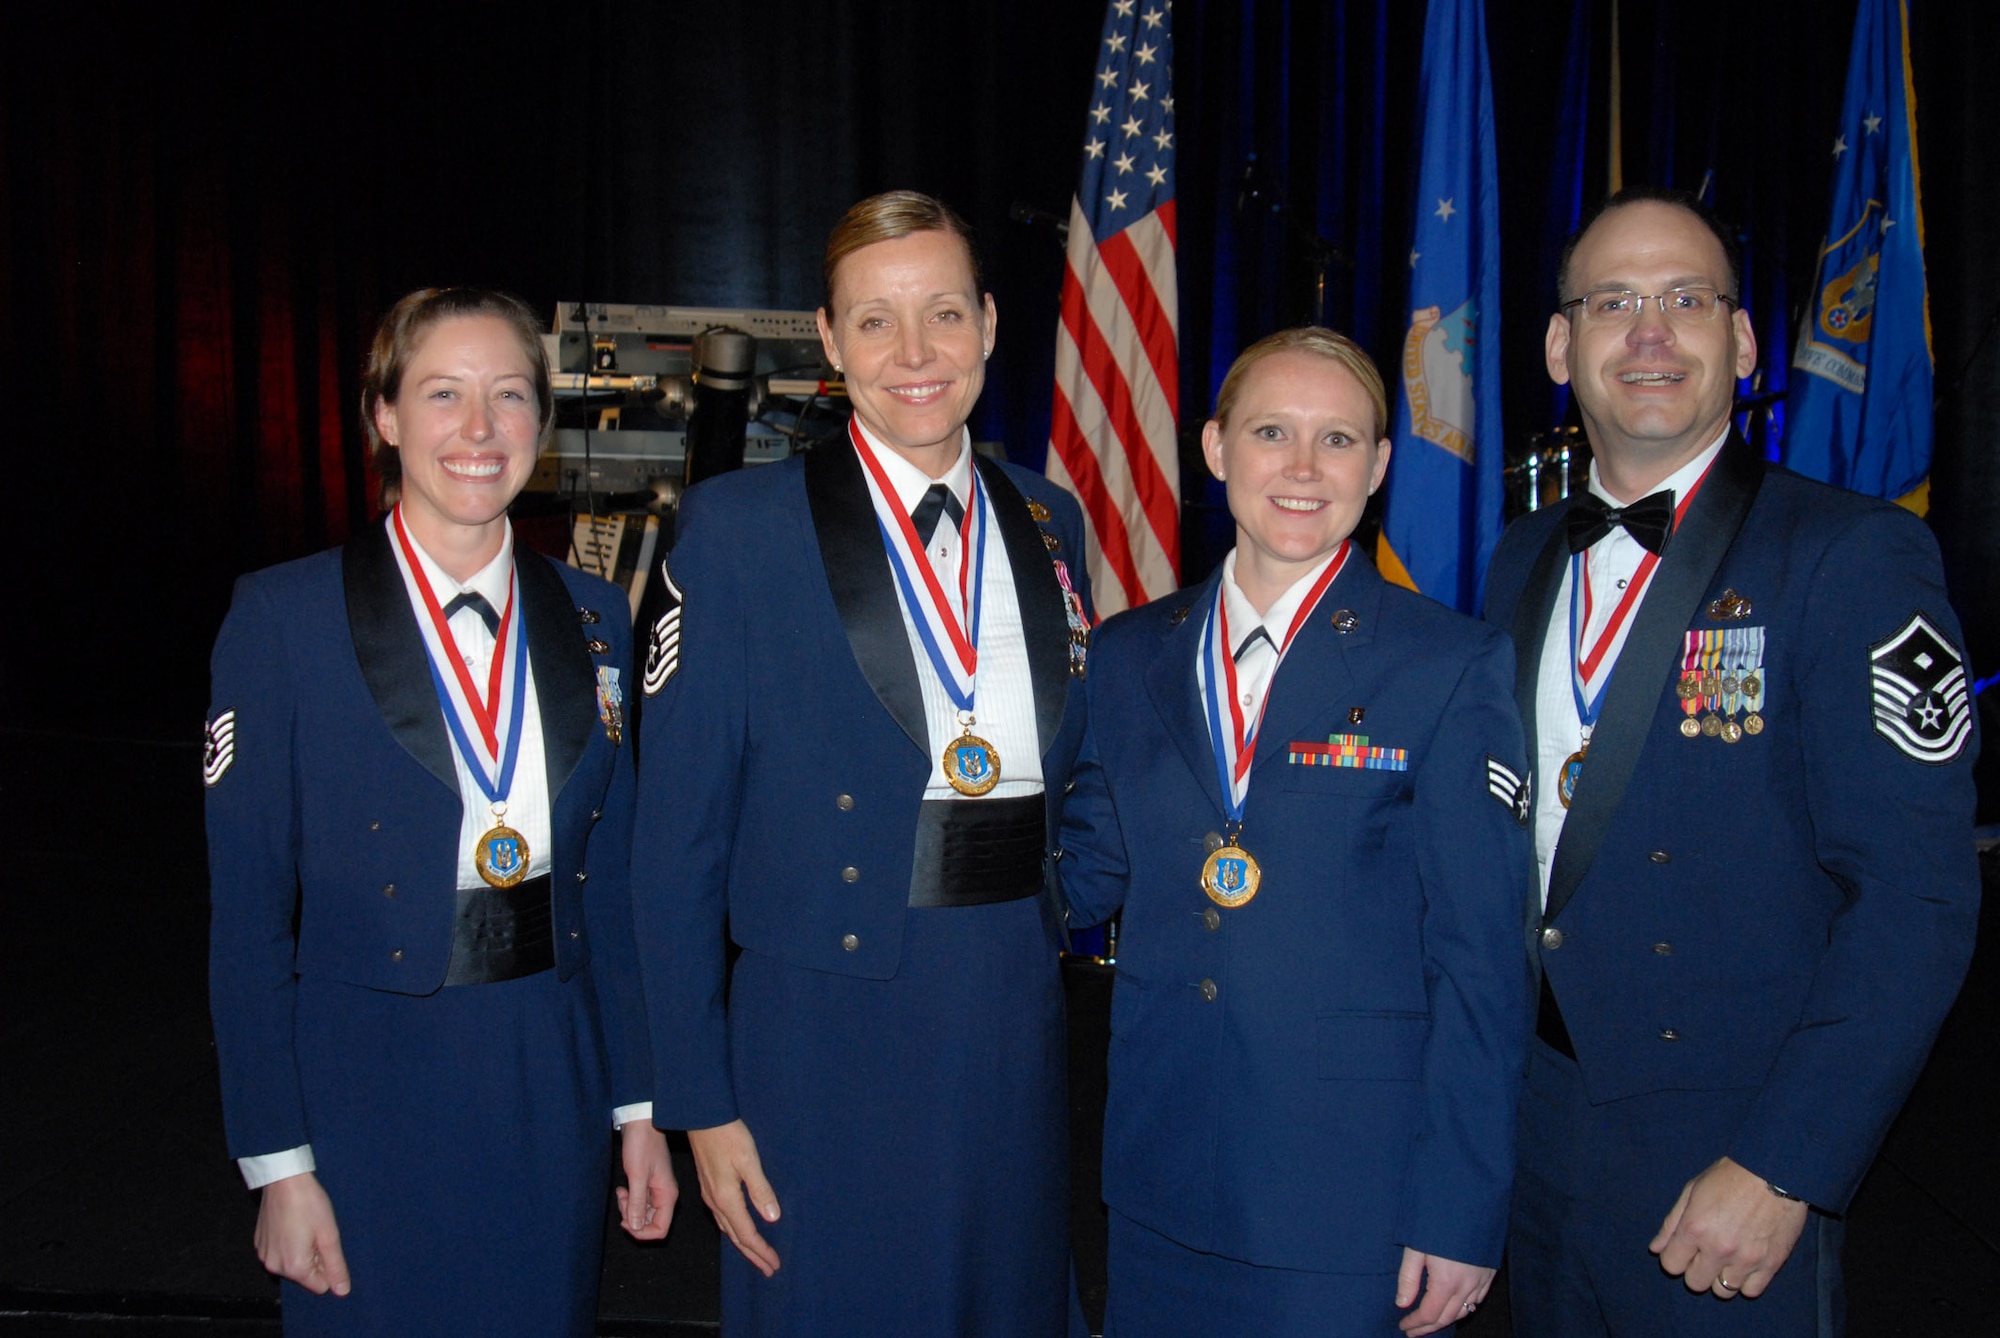 Air Force Reserve Command’s Outstanding Airmen of 2011, from left, NCO category: Tech. Sgt. Megan J. Legacy, 931st Civil Engineer Squadron, McConnell Air Force Base, Kan.; Senior NCO category: Master Sgt. Sandra L. Plentzas, 944th Fighter Wing, Luke AFB, Ariz.; Airman category: Senior Airman Merranda J. Moreno, 944th Aeromedical Staging Squadron, Luke AFB, Ariz.; First Sergeant category:  Master Sgt. Anthony G. Johns, 445th Operations Support Squadron, Wright-Patterson AFB, Ohio. (Air Force photo/Master Sgt. Chance Babin)